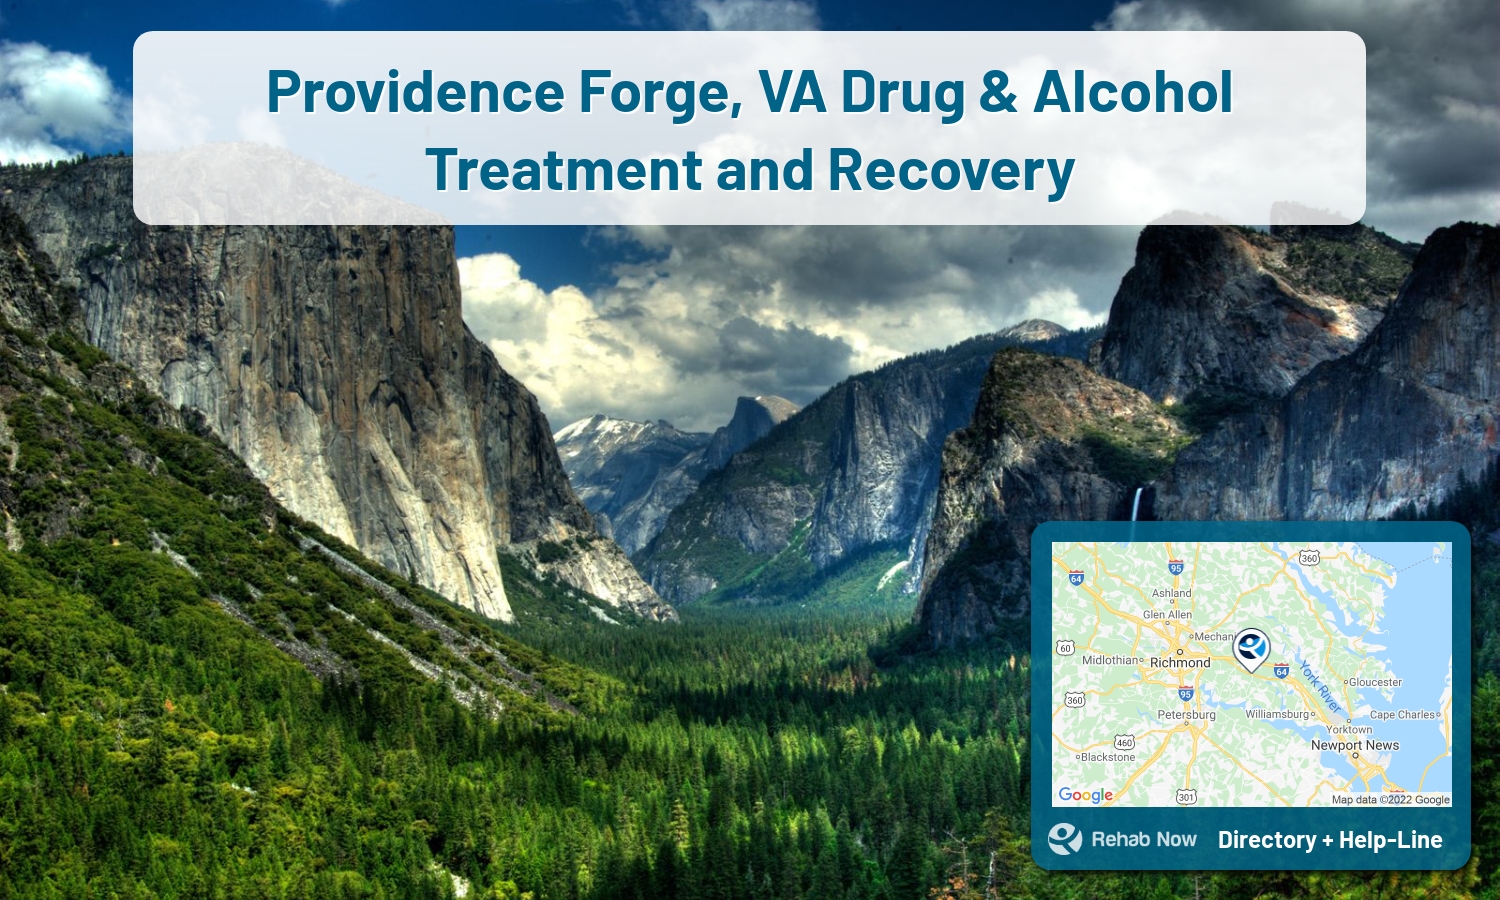 List of alcohol and drug treatment centers near you in Providence Forge, Virginia. Research certifications, programs, methods, pricing, and more.